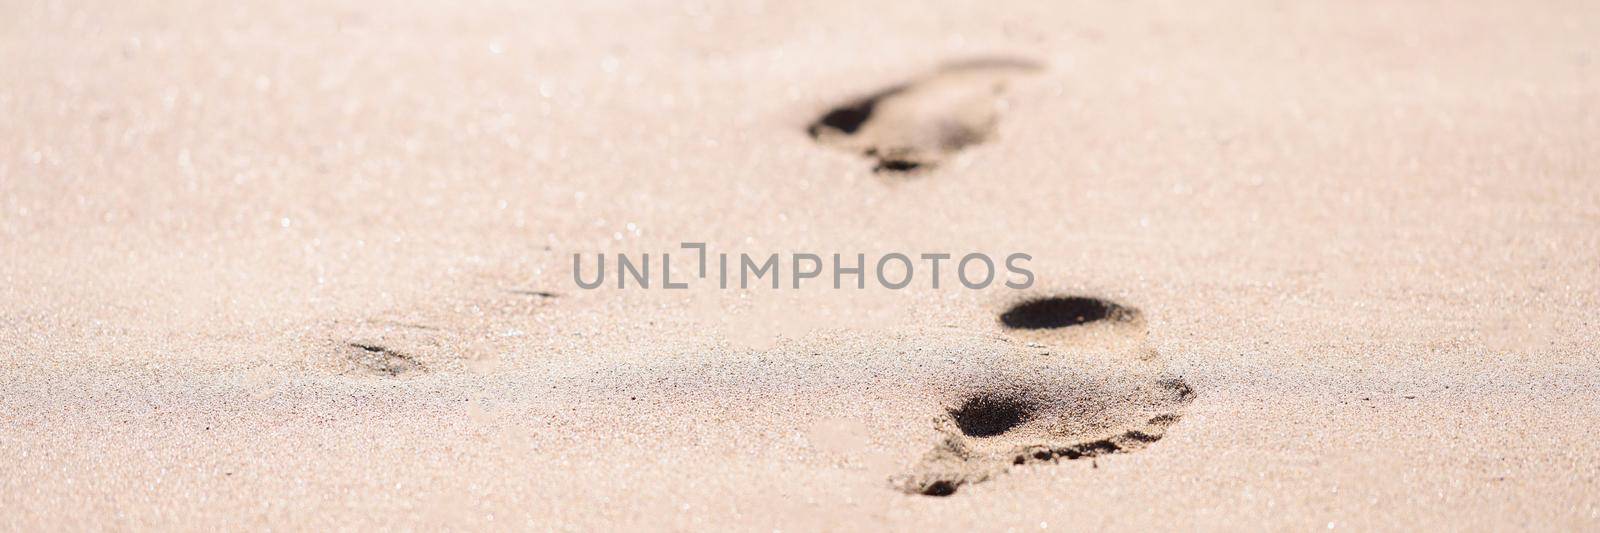 Barefoot prints on wet sand on beach closeup background. Vacation at sea concept